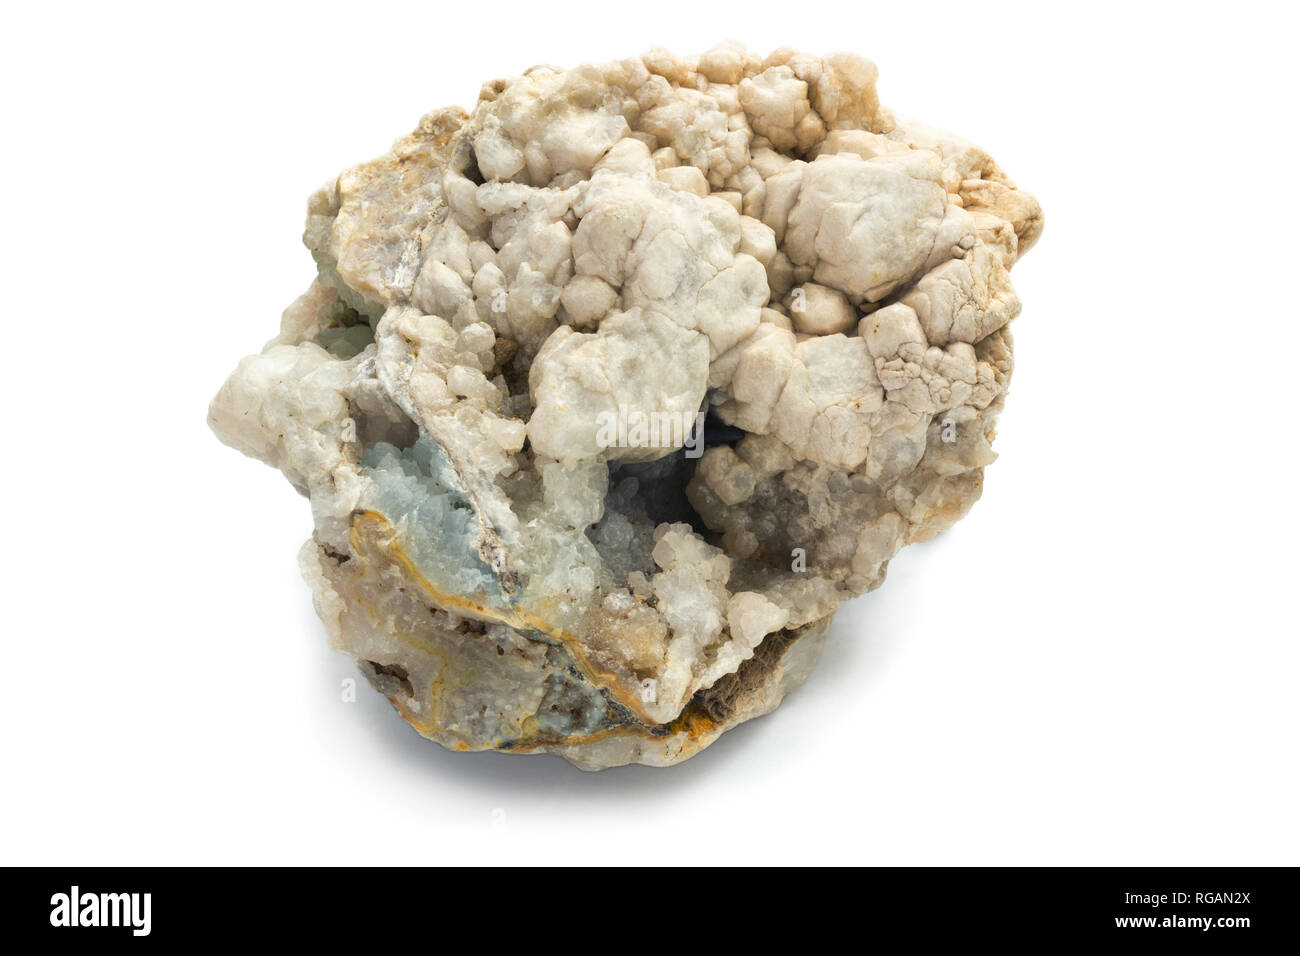 Concretion of minerals with small cavities inside. Found in sedimentary rocks Stock Photo